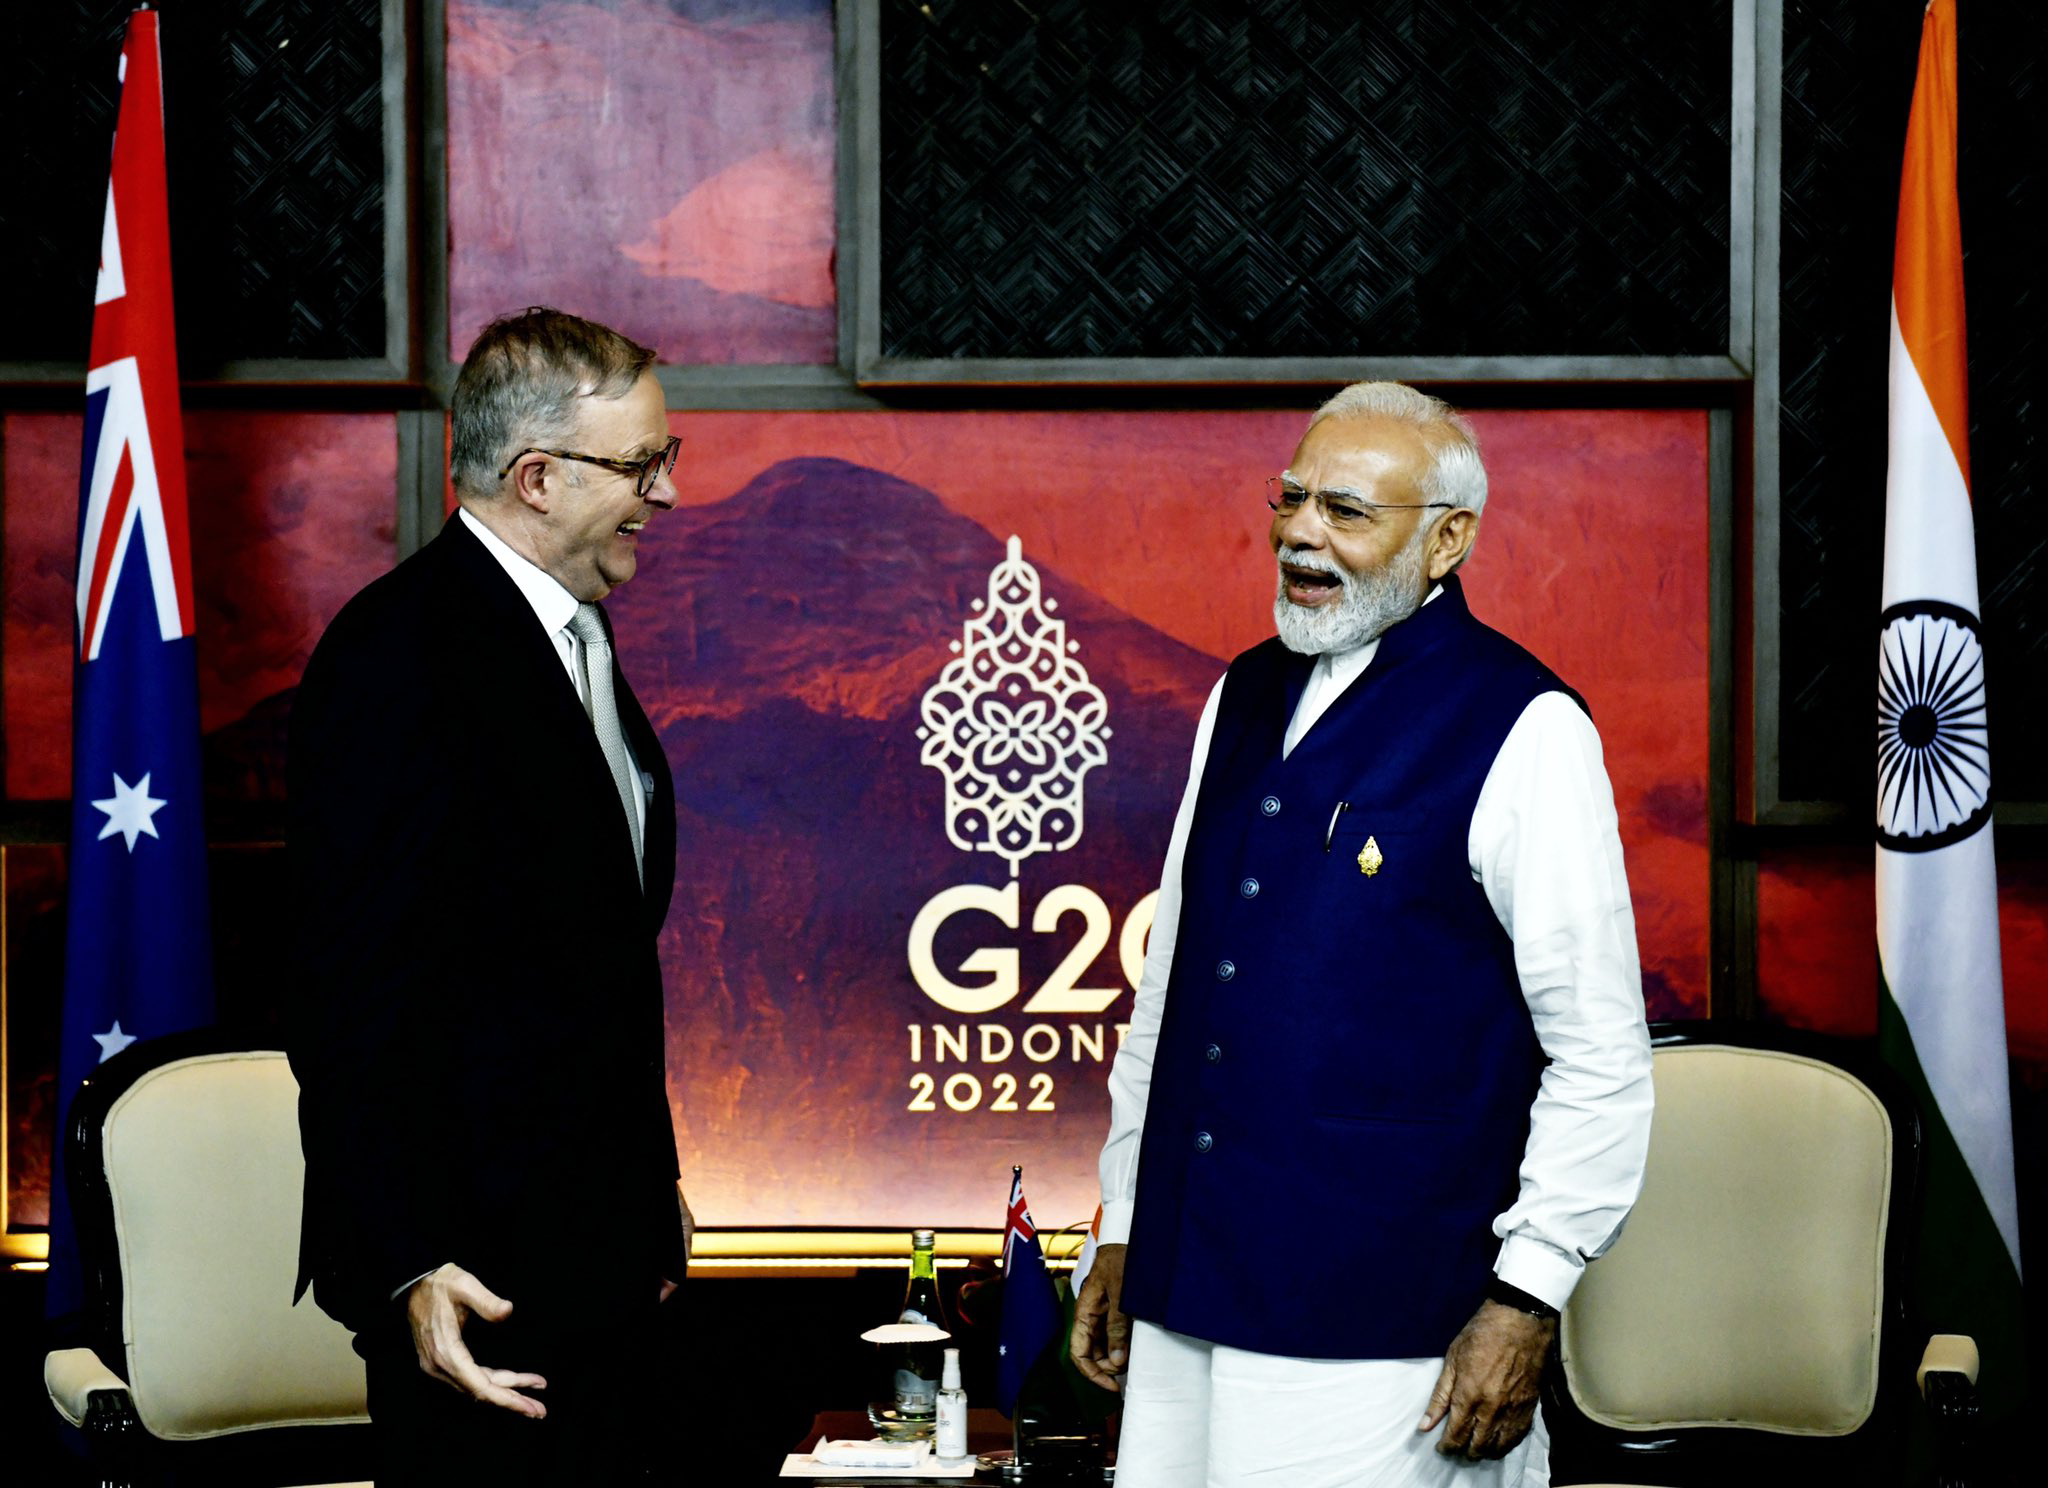 Prime Minister Modi at the 17th G20 Summit in Indonesia